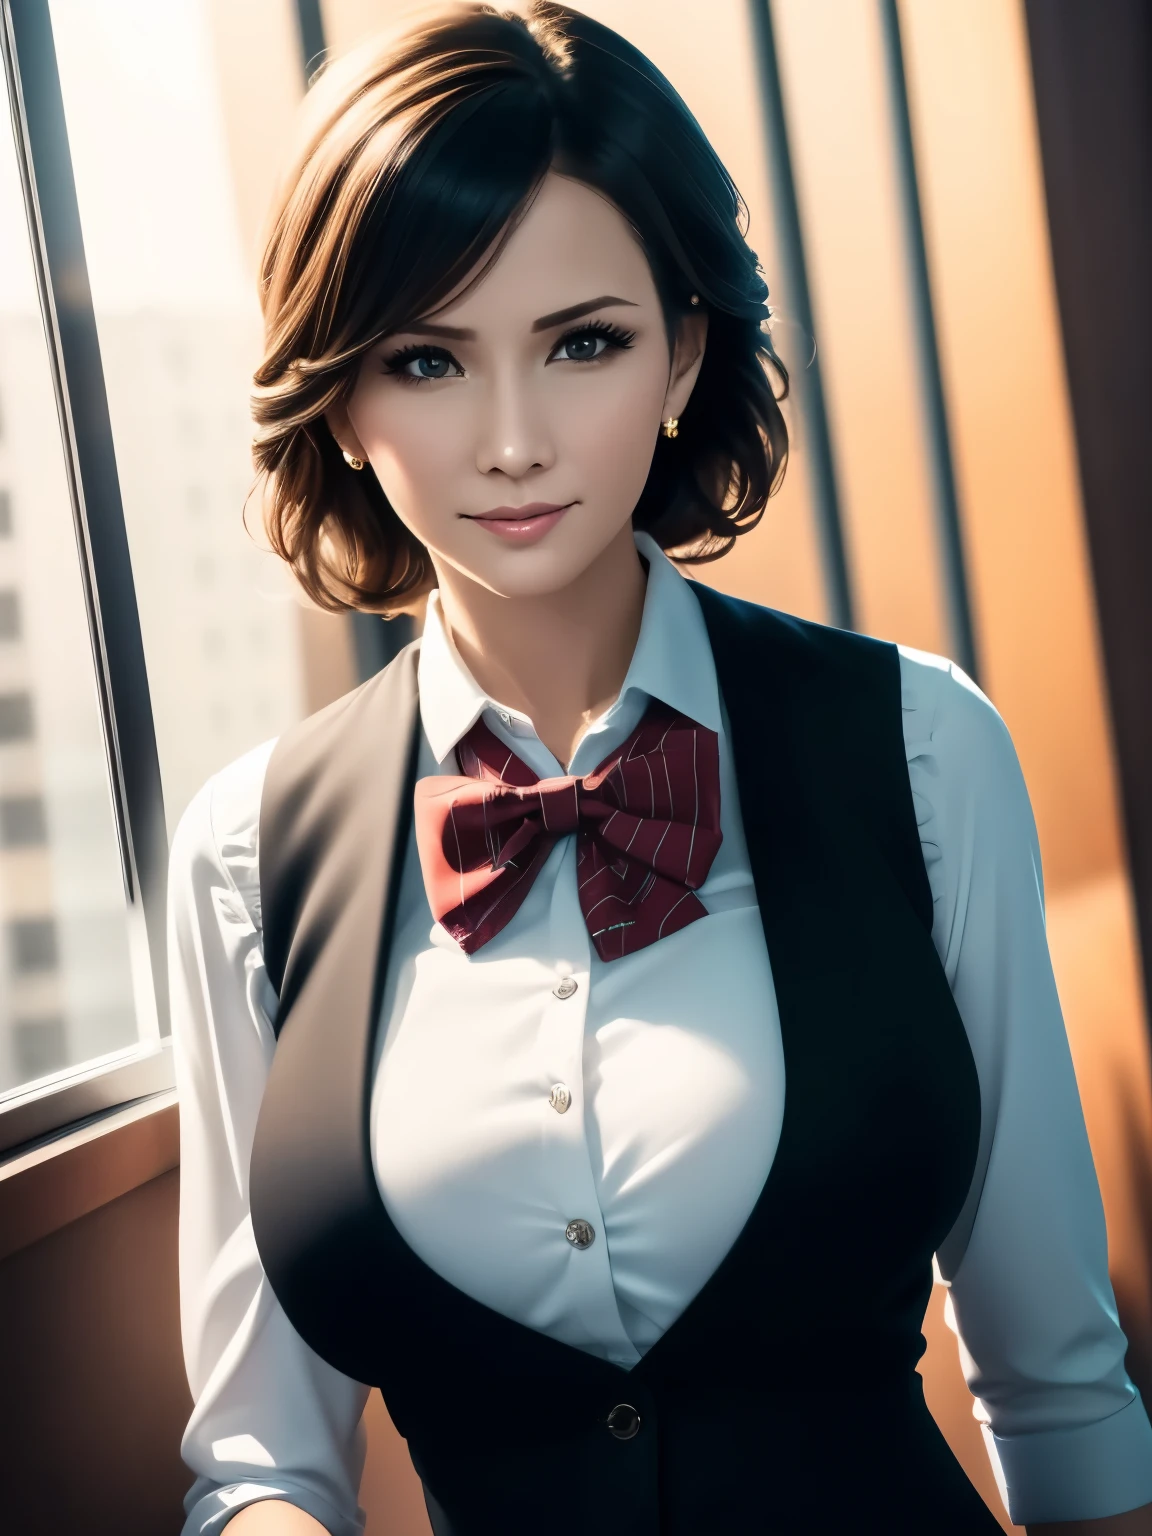 1 girl, mature woman, vest, bow, photograph, very detailed, surreal, 3D, octane rendering, realistic, highest quality, hire, detailed face, office, building from the window, detailed background, diffused sunlight, Depth of the bounds written, Bokeh